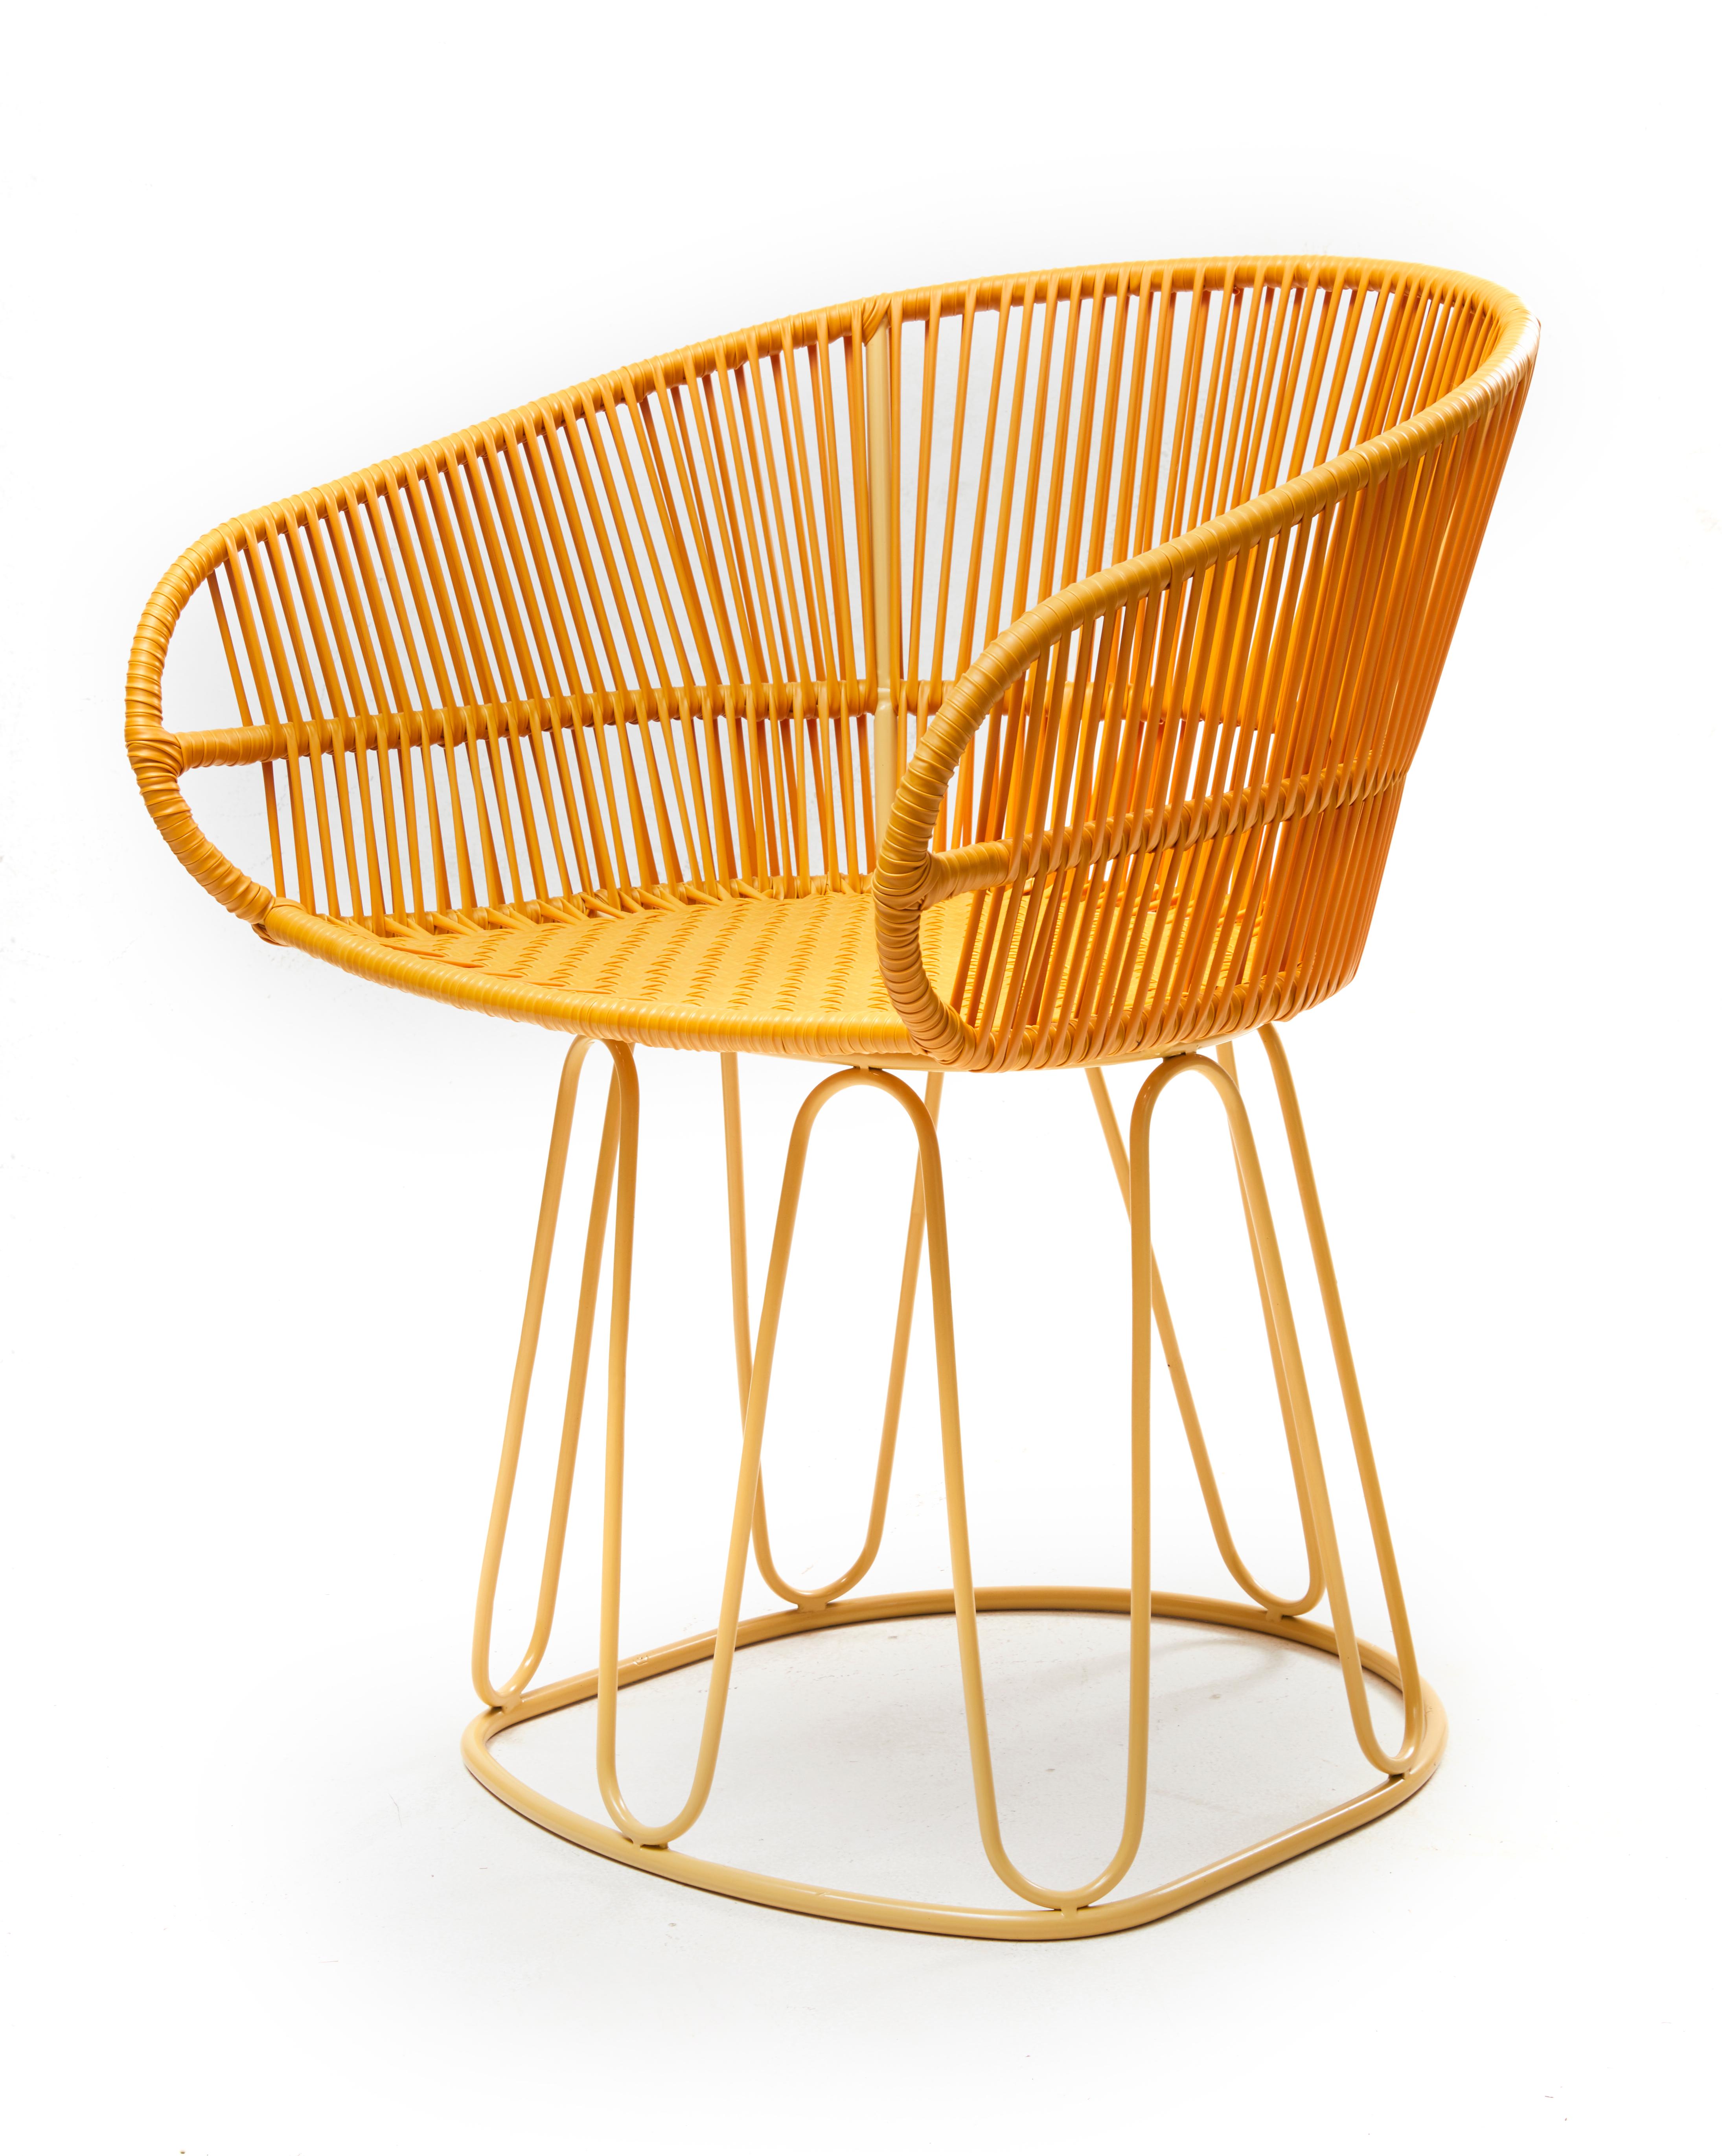 Set of 2 honey circo dining chair by Sebastian Herkner.
Materials: Galvanized and powder-coated tubular steel. PVC strings.
Technique: Made from recycled plastic. Weaved by local craftspeople in Colombia. 
Dimensions: W 61.5 x D 56.5 x H 77.5 cm